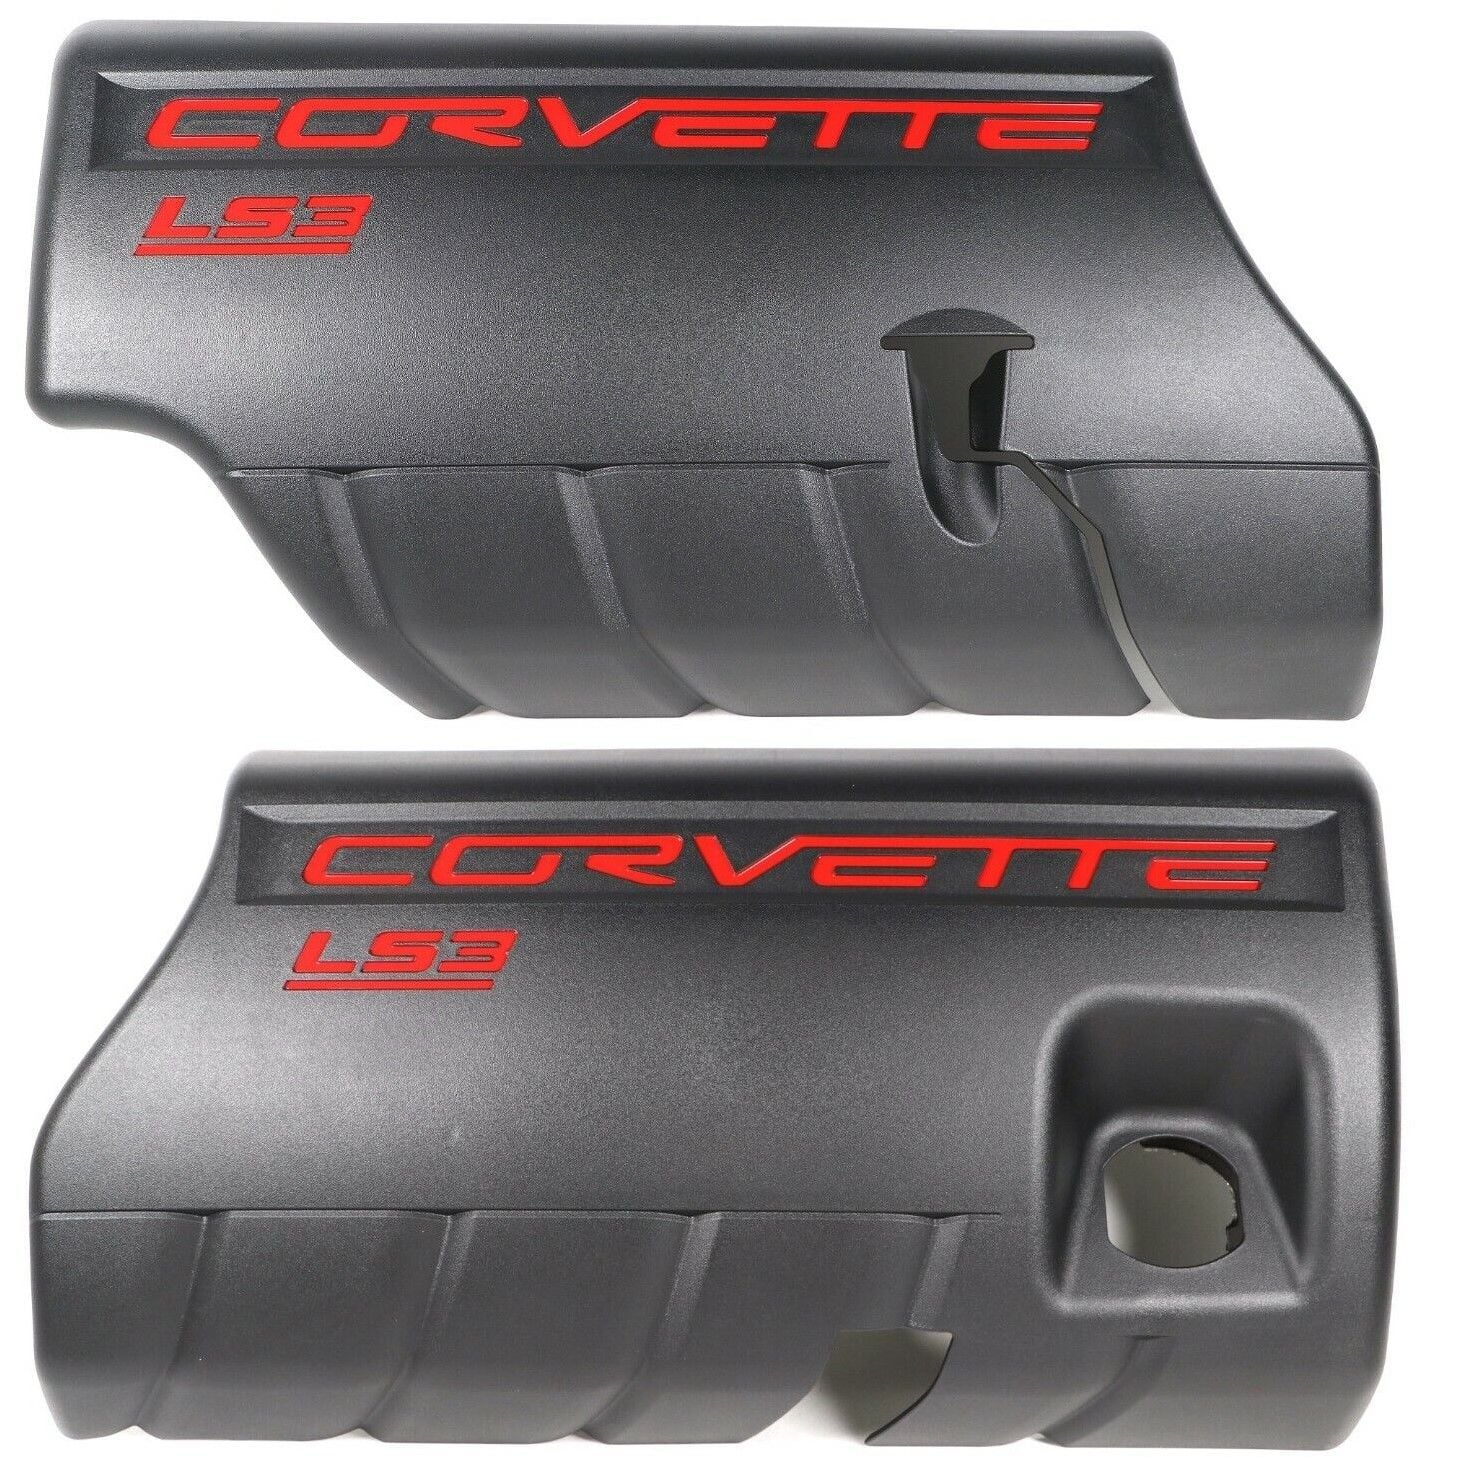 Engine - Intake/Fuel - LS3 Fuel Rail Covers Wanted- WTB - New or Used - 2008 to 2012 Chevrolet Corvette - San Francisco, CA 94116, United States